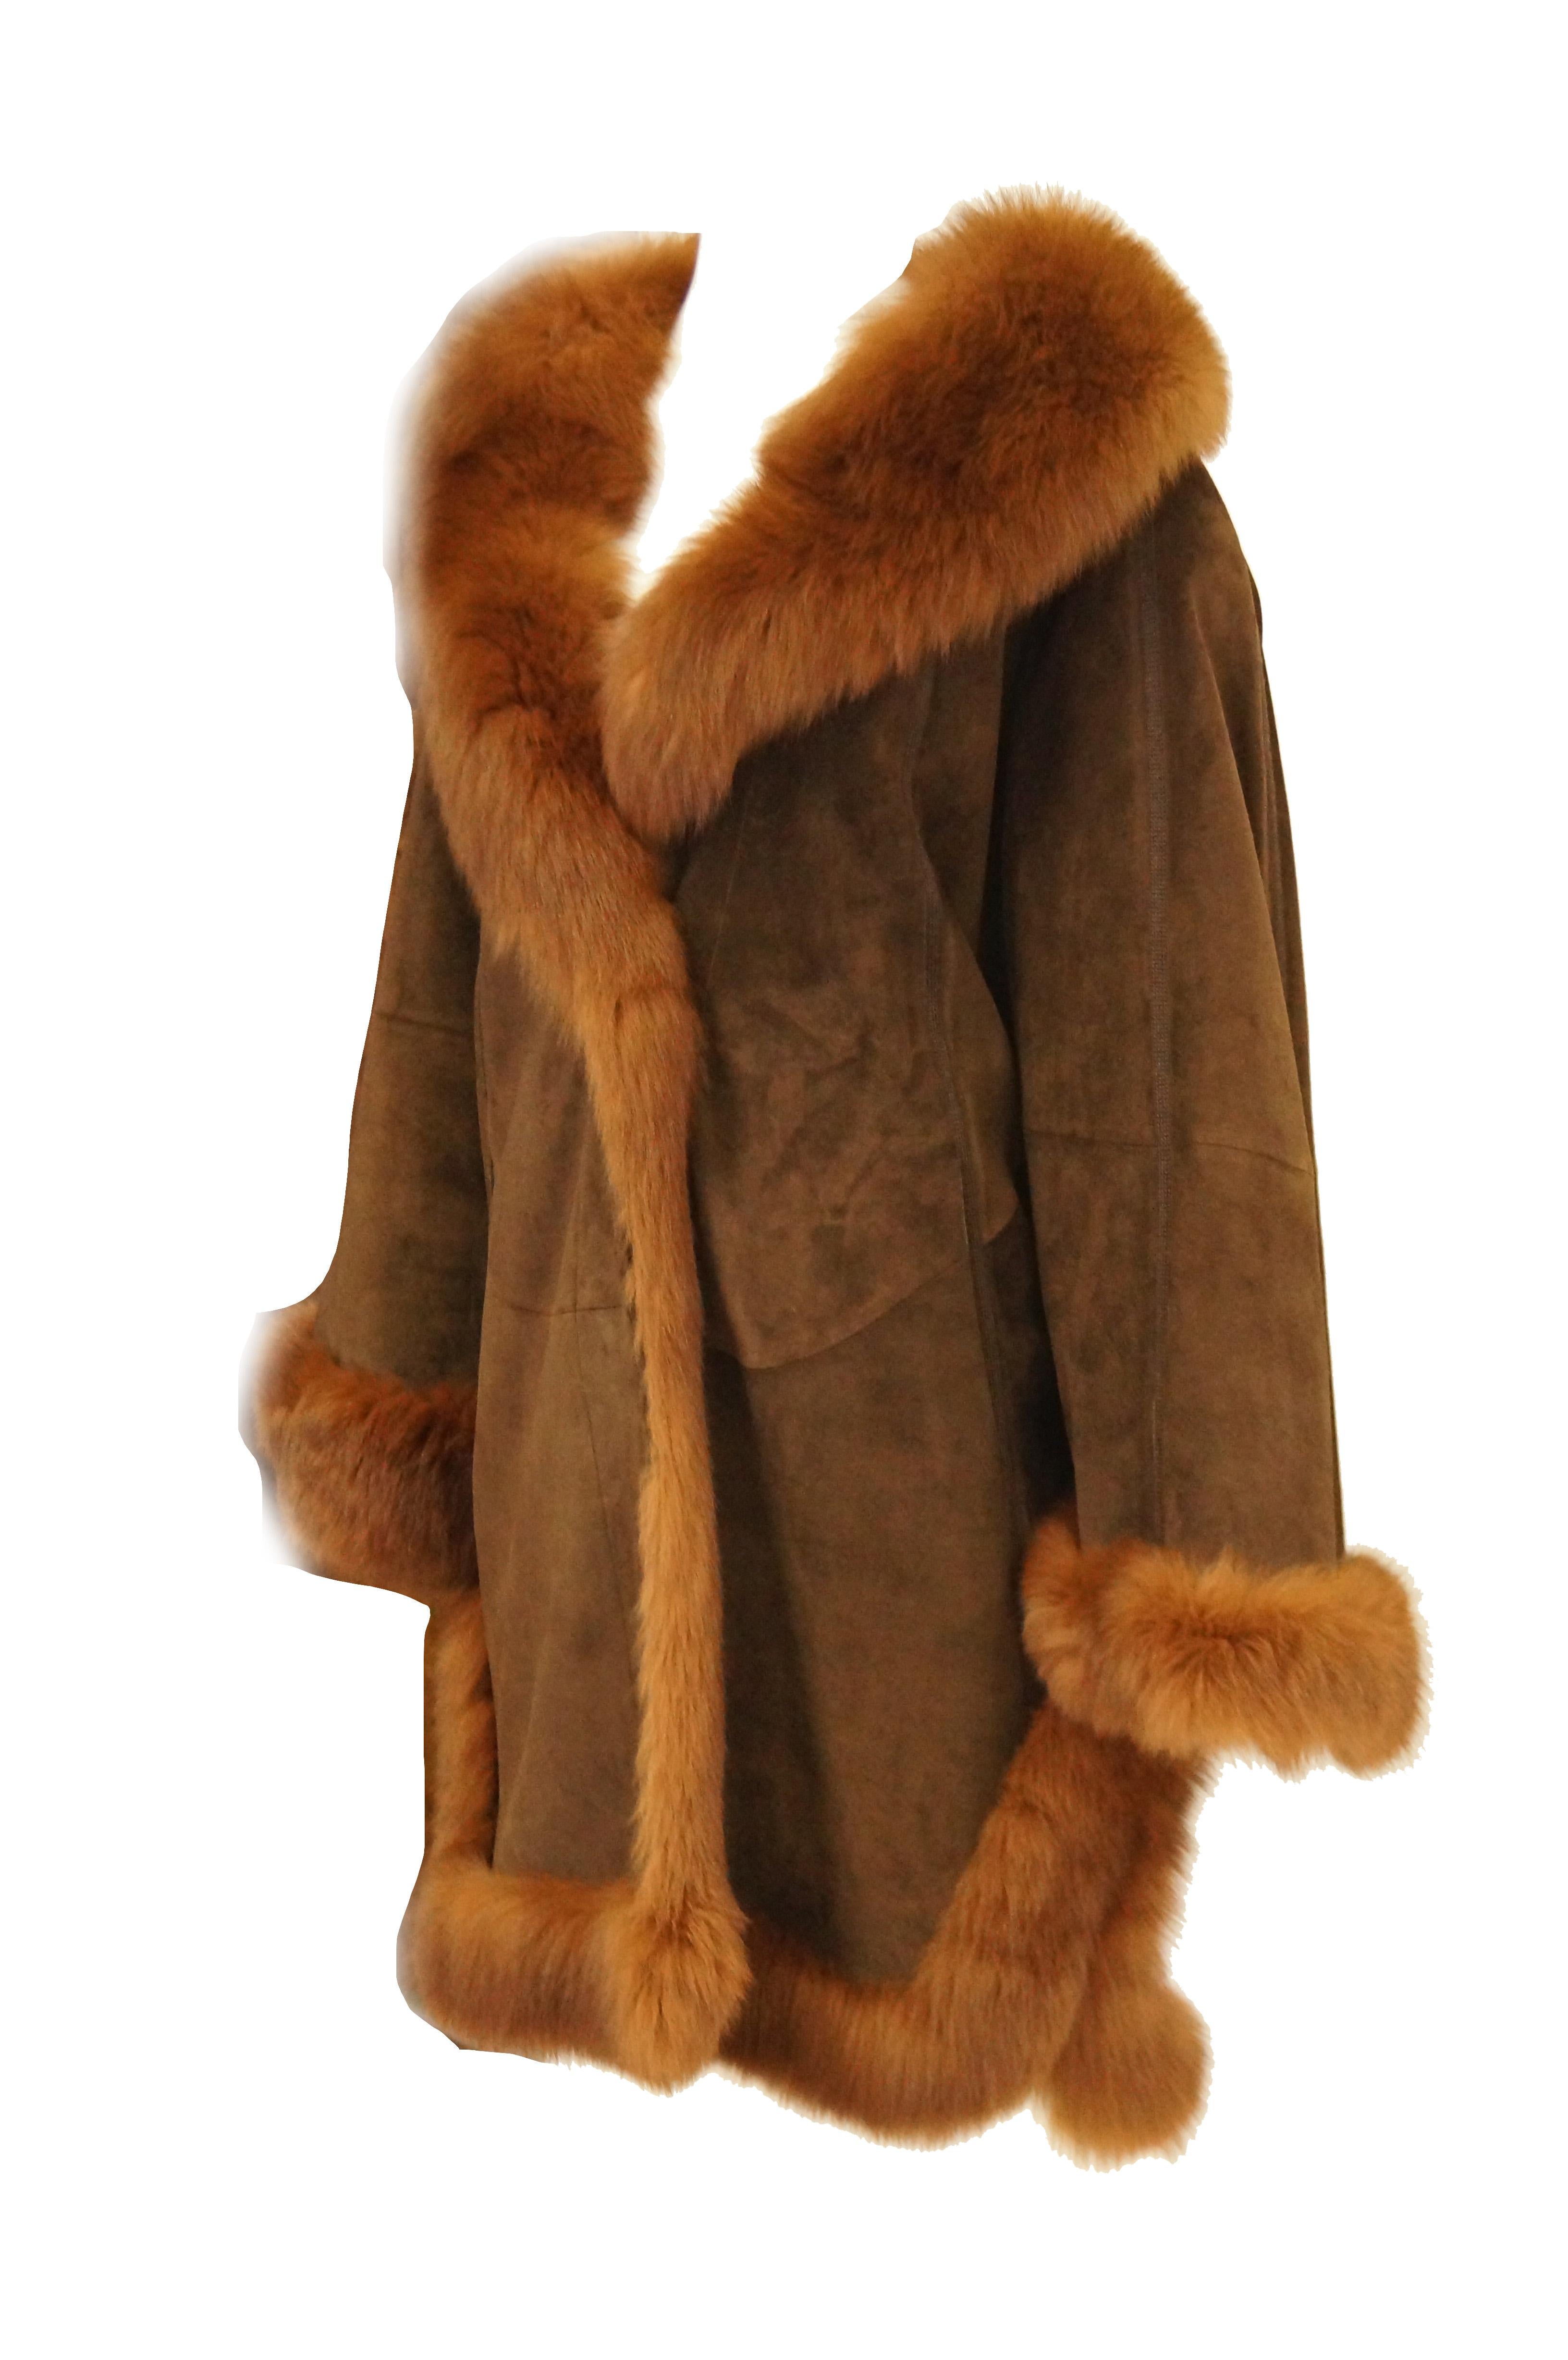 Too amazing! Loosely fitting suede coat with fox trim and knitted lining! The coat has a triangular silhouette with wide sleeves, a luxuriously plush shawl collar. The coat has a bit of a swing silhouette that's subverted with slits on the side. The